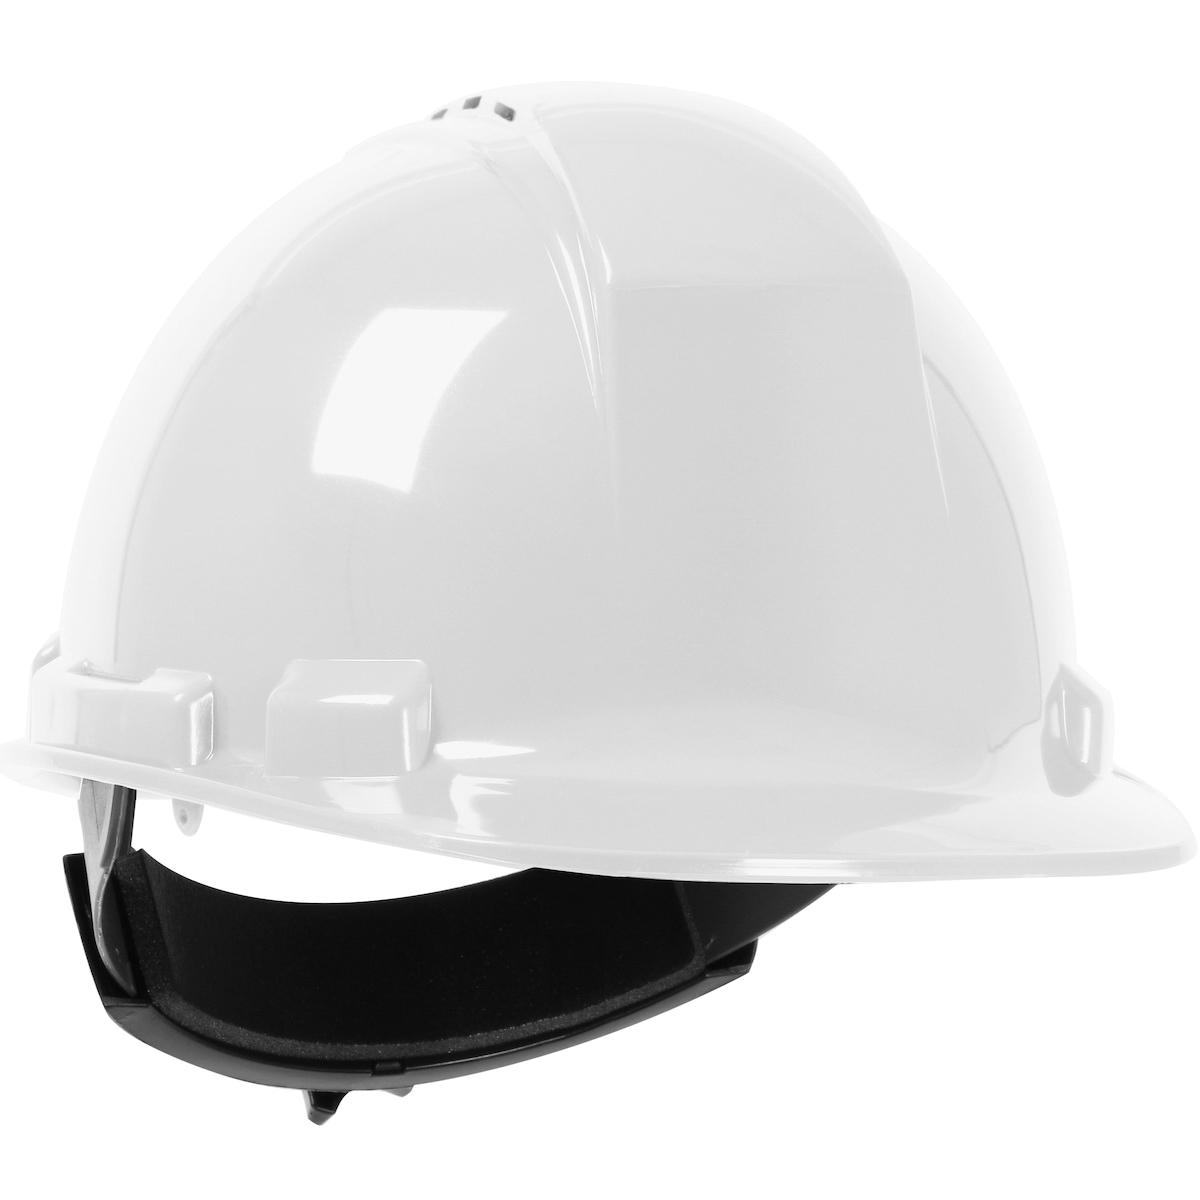 280-HP241RV-01 Cap Style Hard Hat, 6-1/4 in L x 11.38 in W, 4-Point Quick-Release Suspension, White